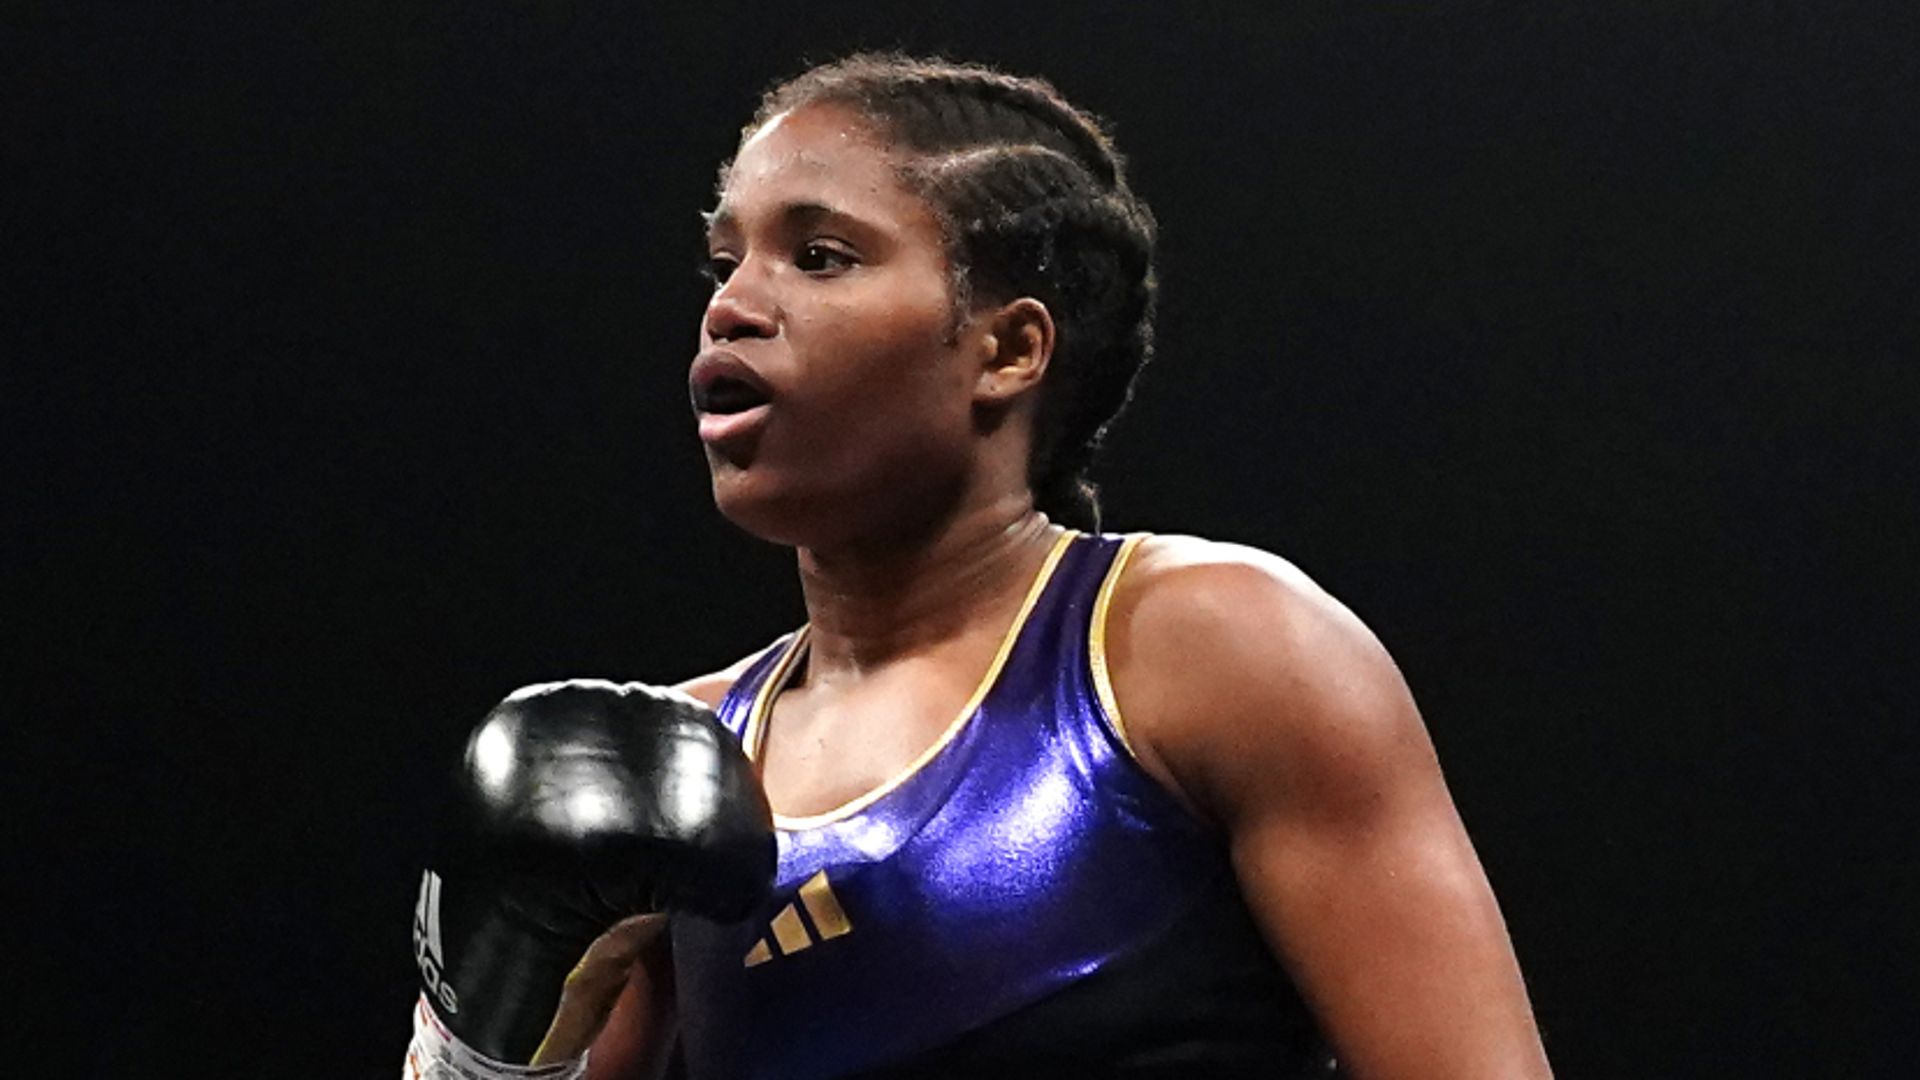 Dubois can show she is boxing's biggest young talent